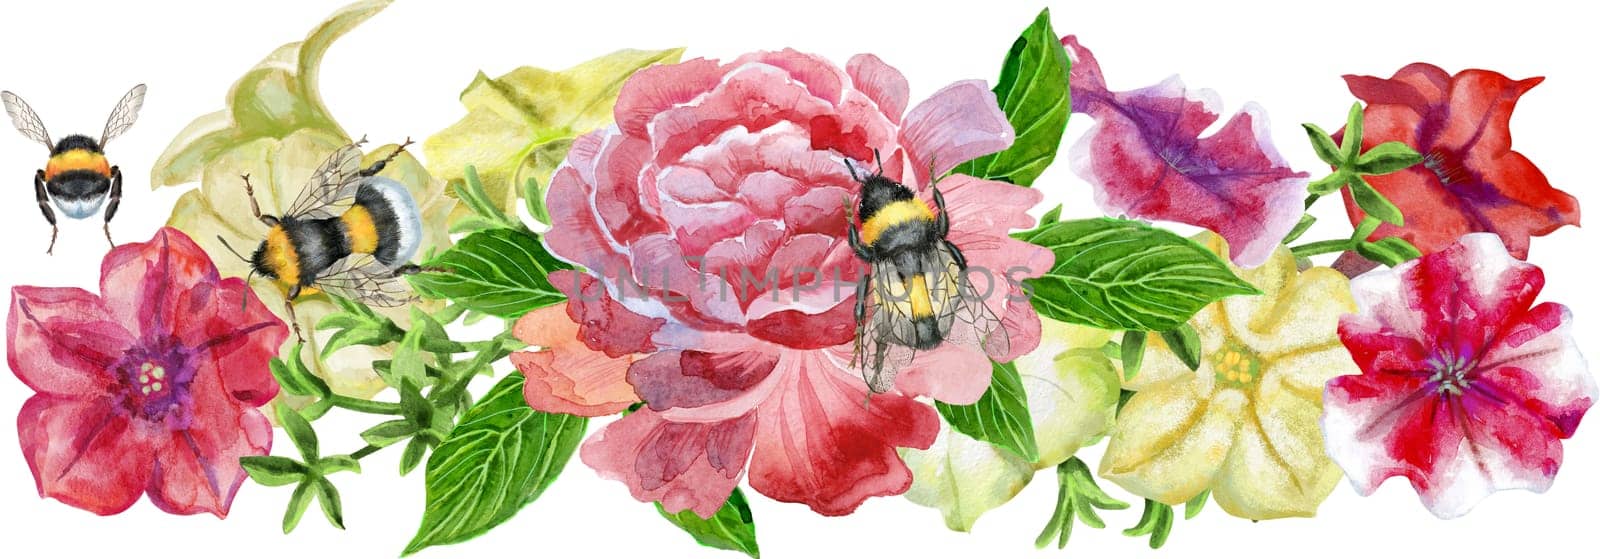 Composition of color petunia and peony flowers. Watercolor illustration by NataOmsk